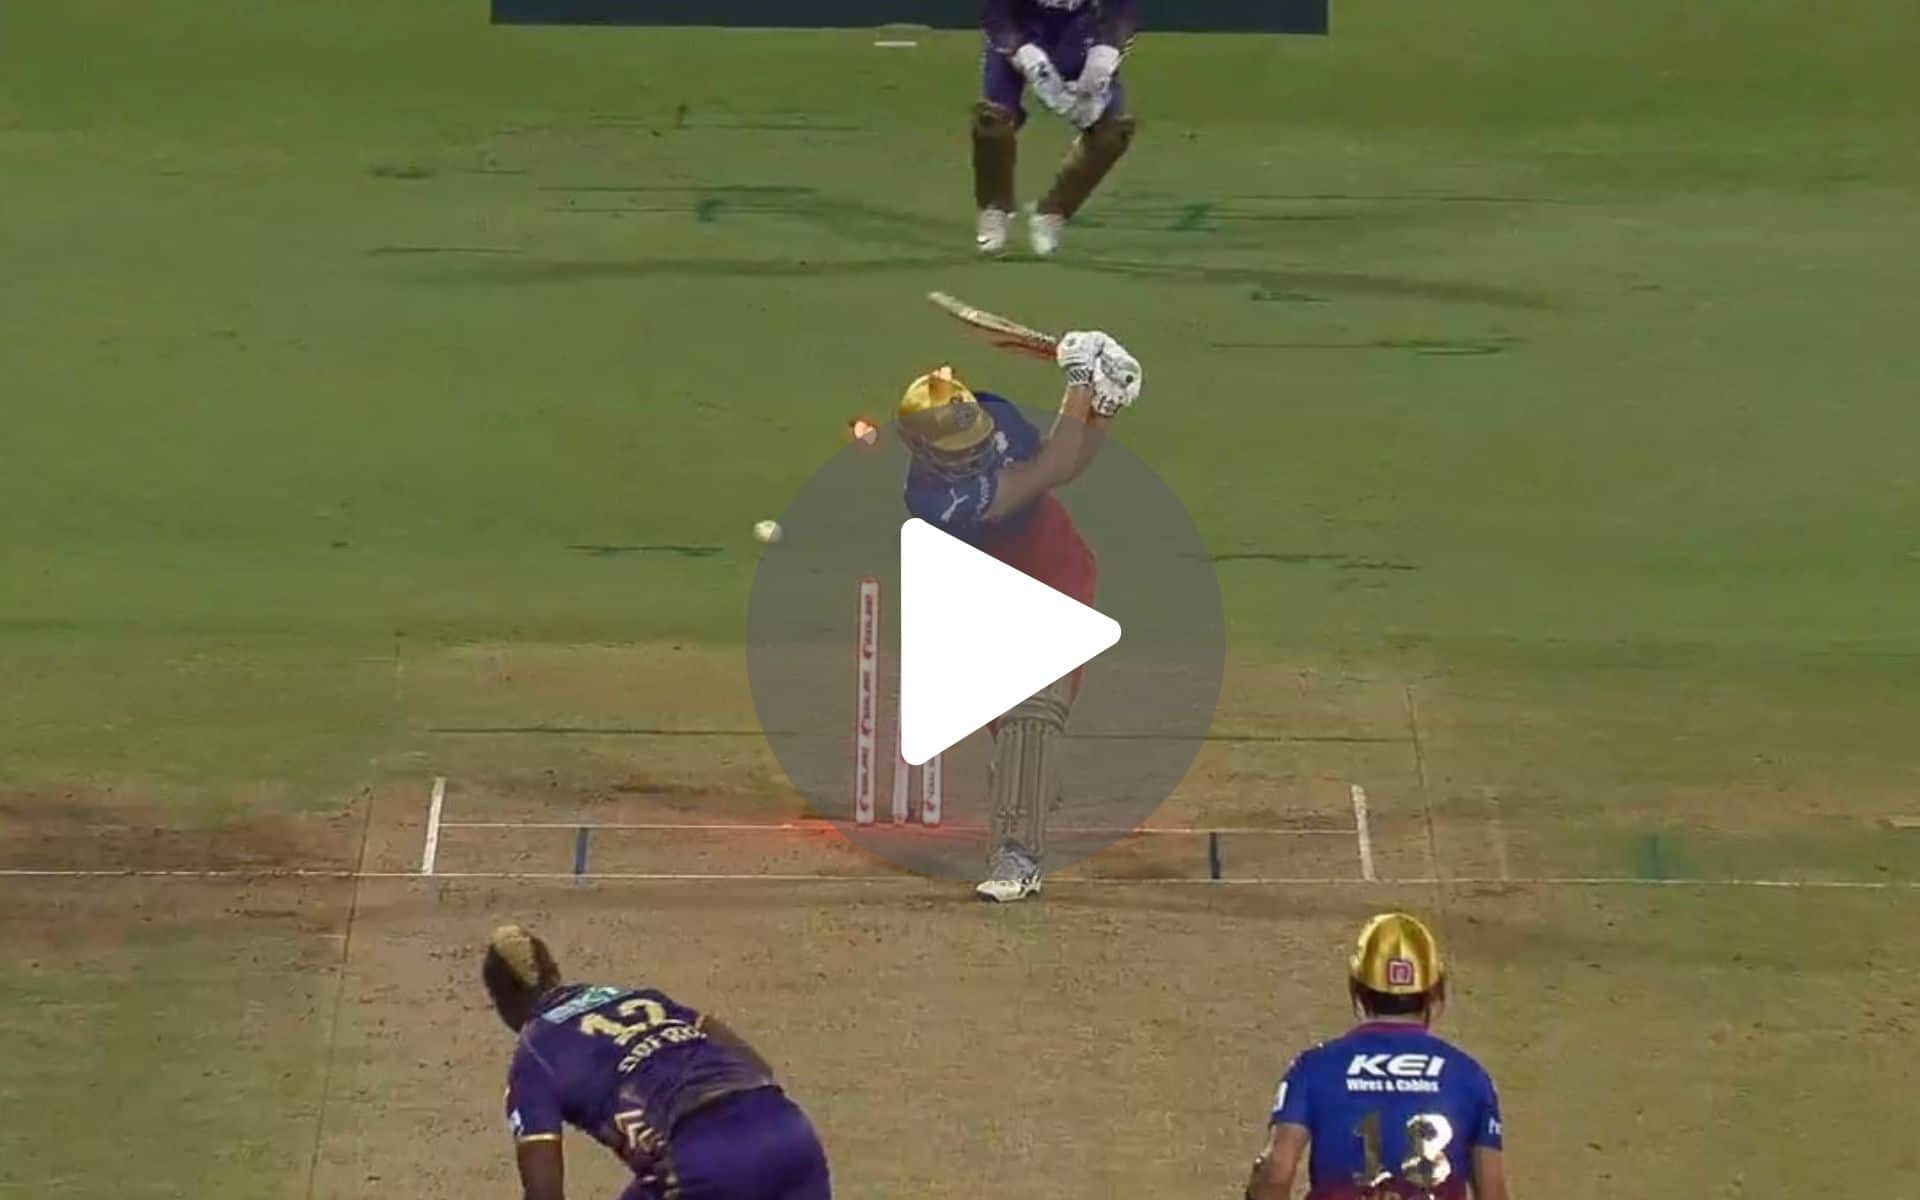 [Watch] Cam Green ‘Nicely Cleaned Up’ As Andre Russell Wins The Battle Of All-Rounders